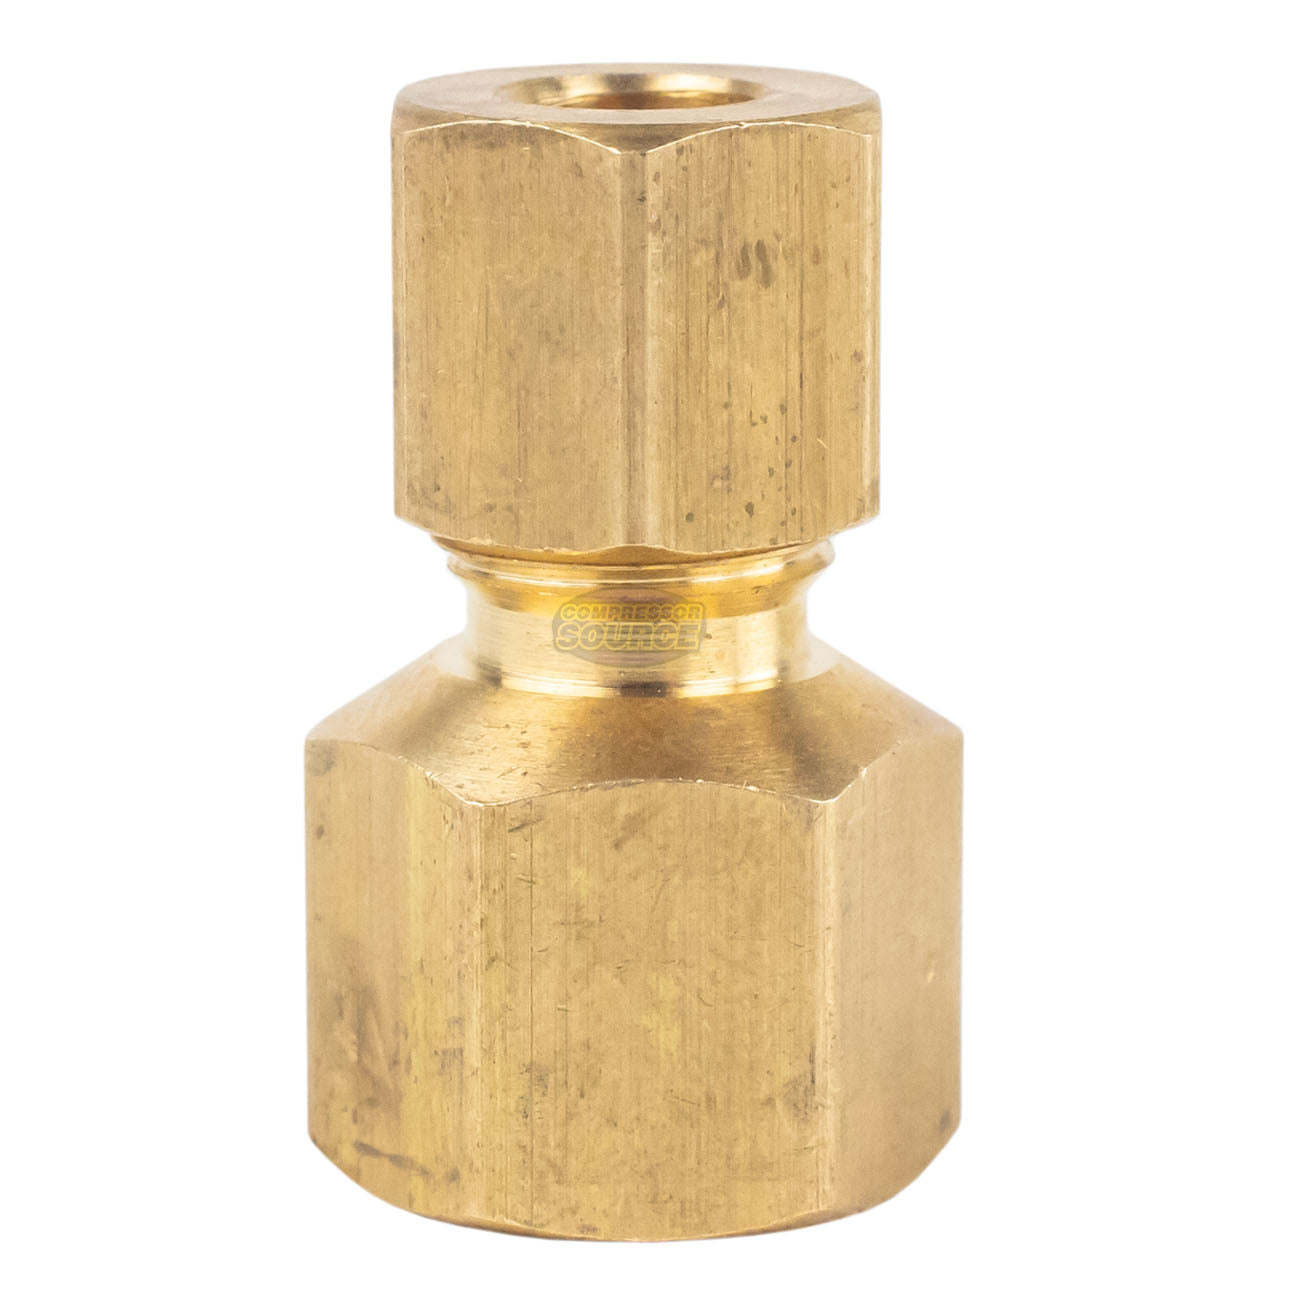 3/8 T x 1/2 NPT Compression Brass Fitting - Female Connector (Tube to  Female Pipe)